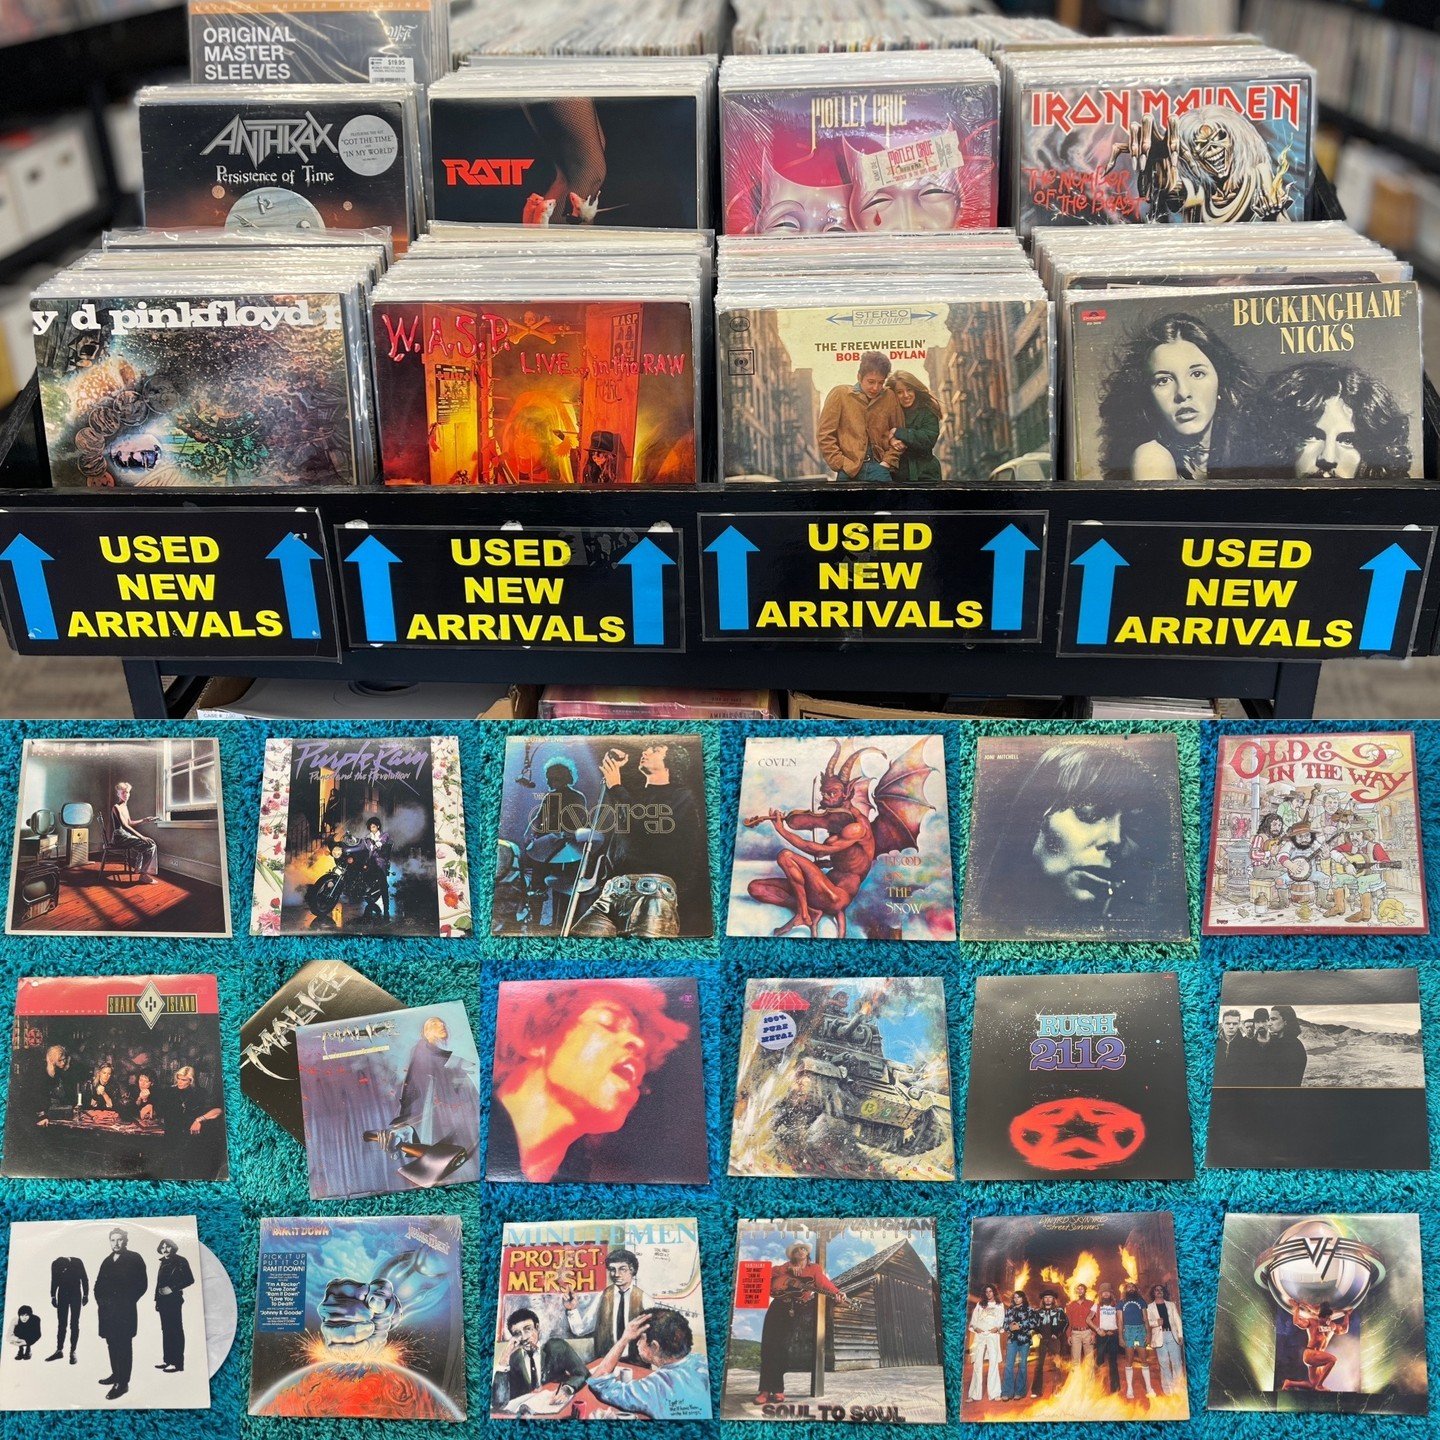 It's a busy weekend in Lincoln!  We hope you have time to stop by and snag of the great new arrivals going out tomorrow!  Most are clean original pressings!  Anthrax, Ratt, Motley Crue, Iron Maiden, Pink Floyd (UK Import), Wasp, Bob Dylan, Buckingham